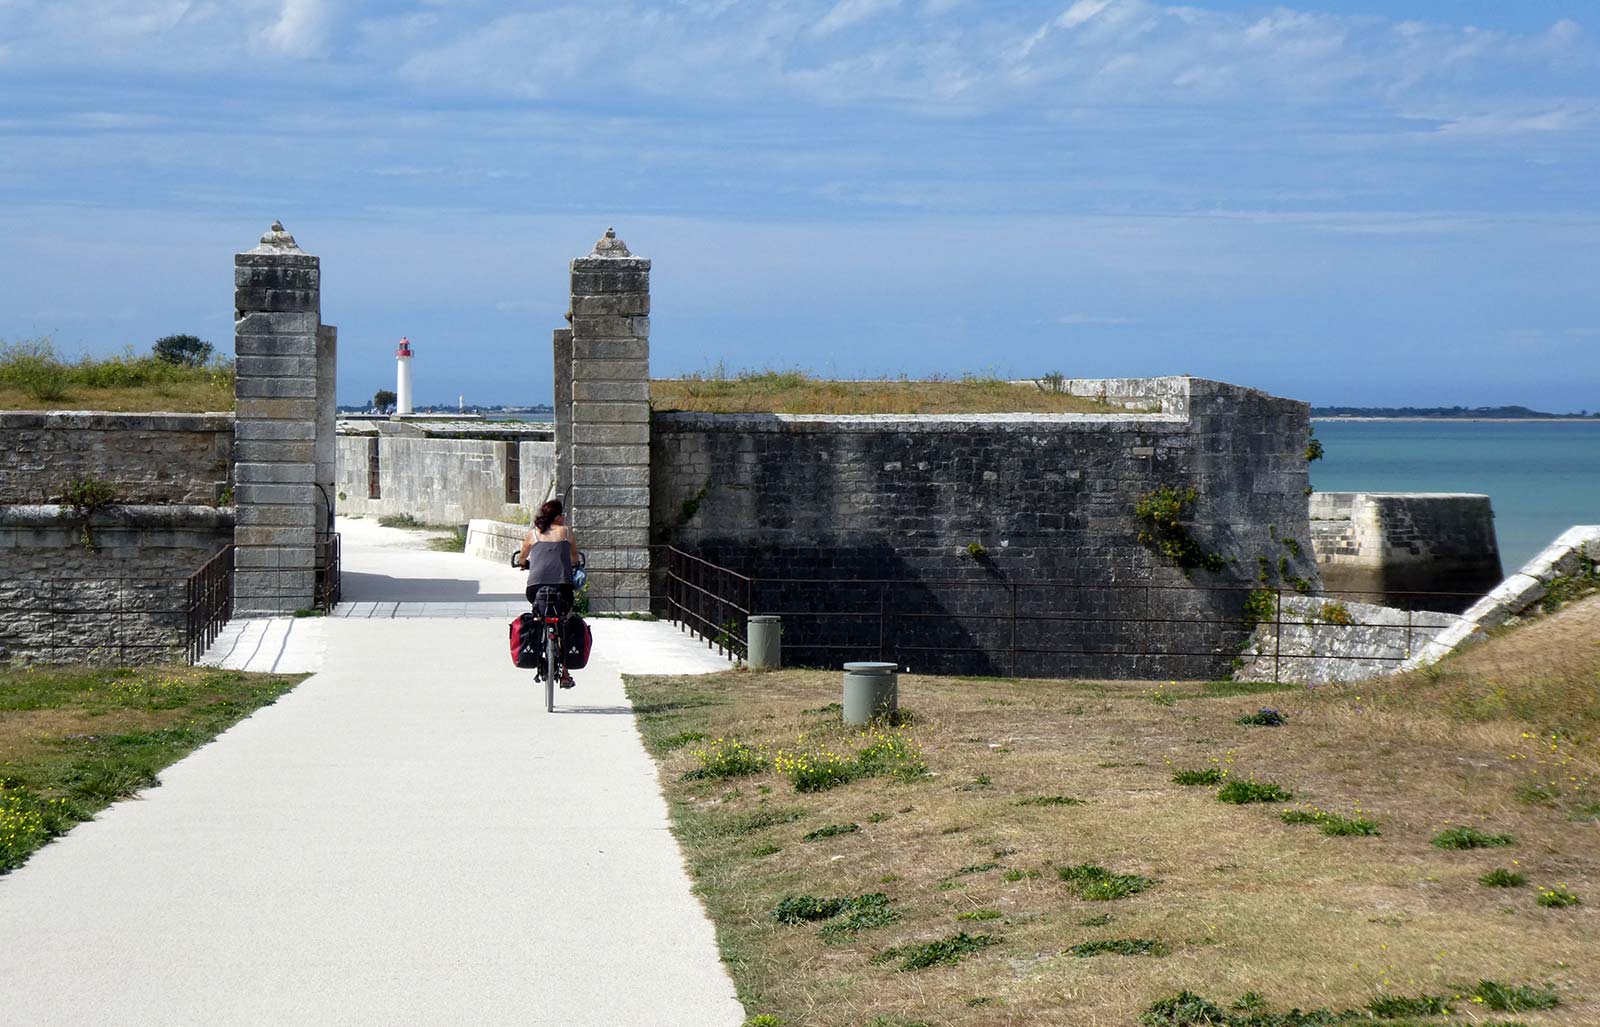 Bike ride to the citadel of Chateau d'Oléron